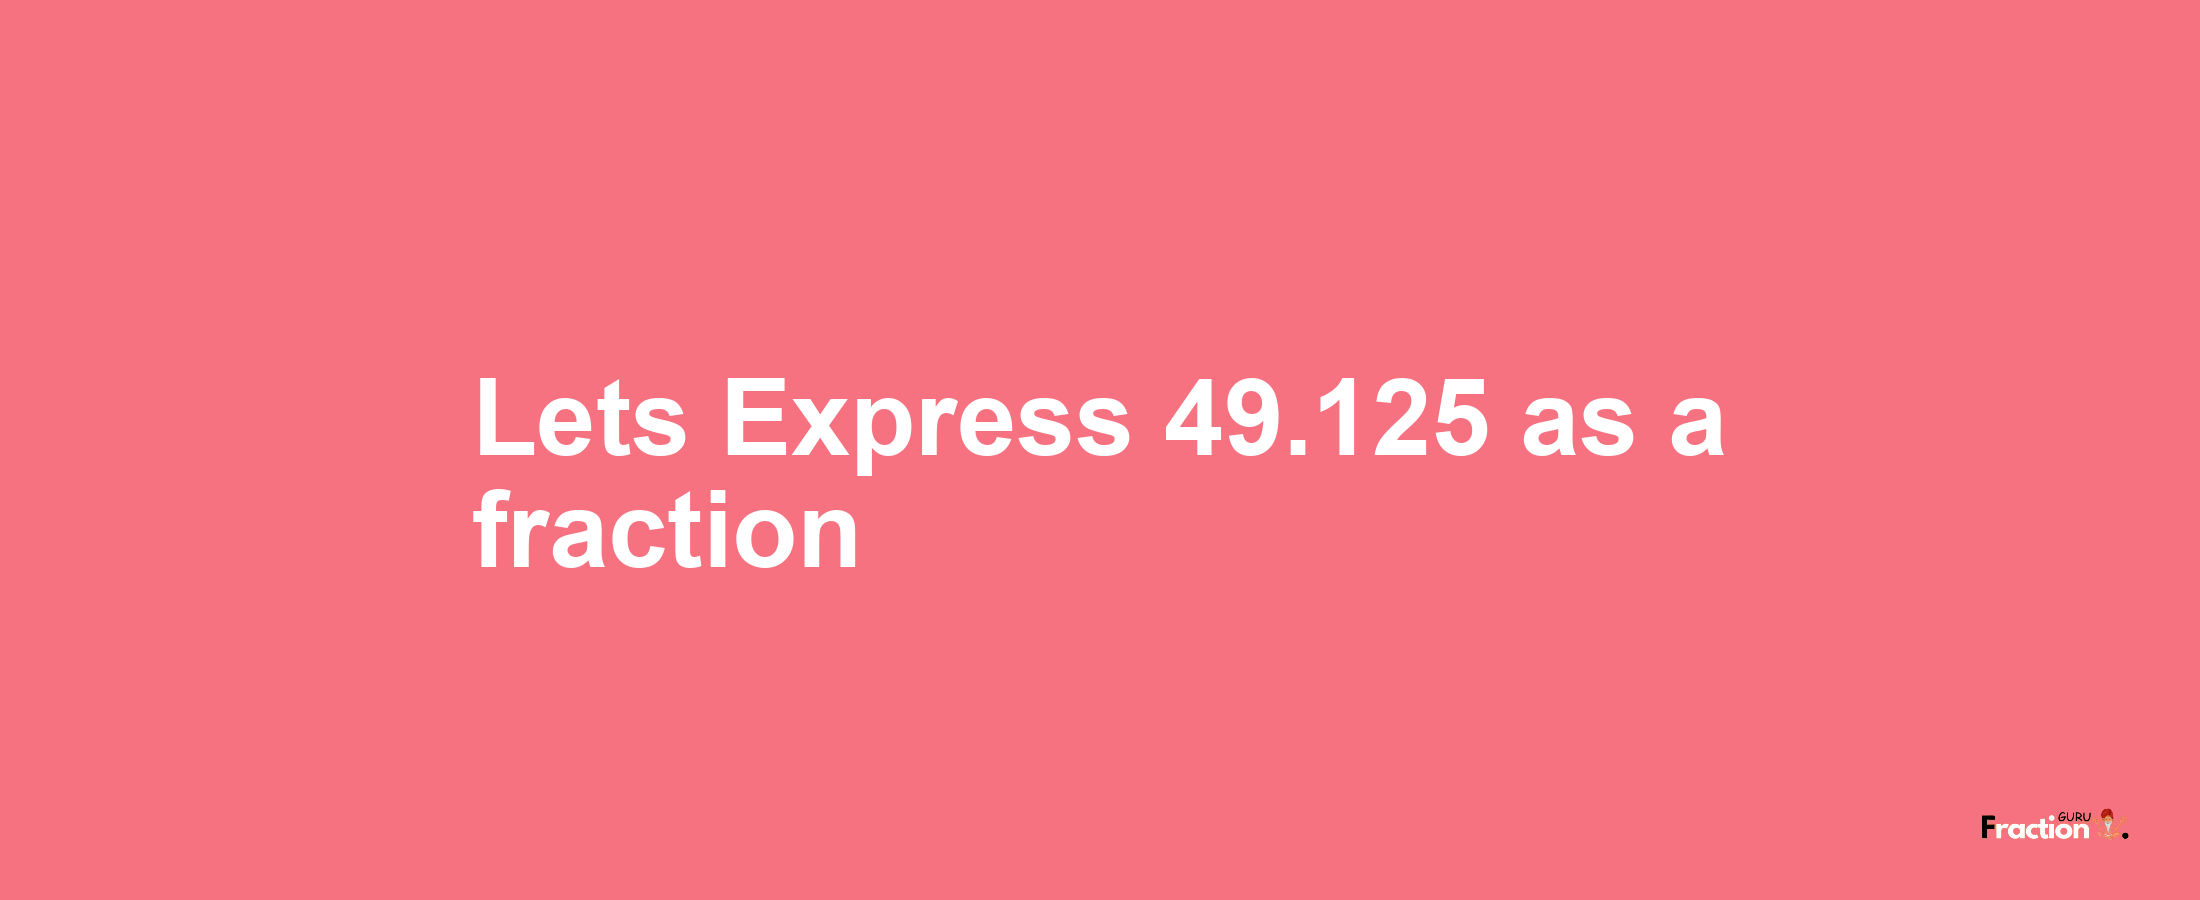 Lets Express 49.125 as afraction